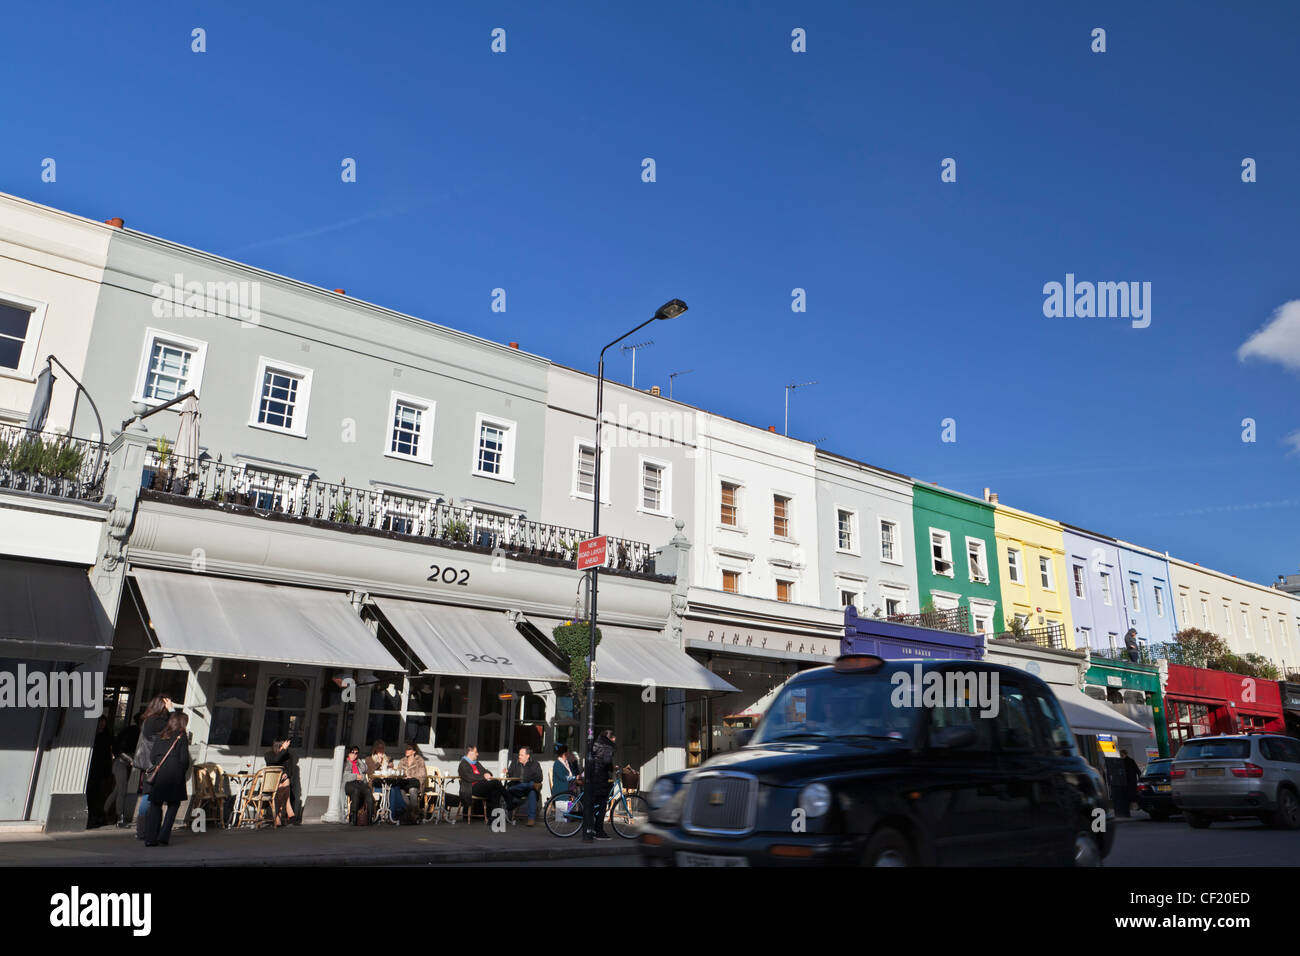 A black London taxi cab passing a row of shops and restaurants in Westbourne Grove. Stock Photo